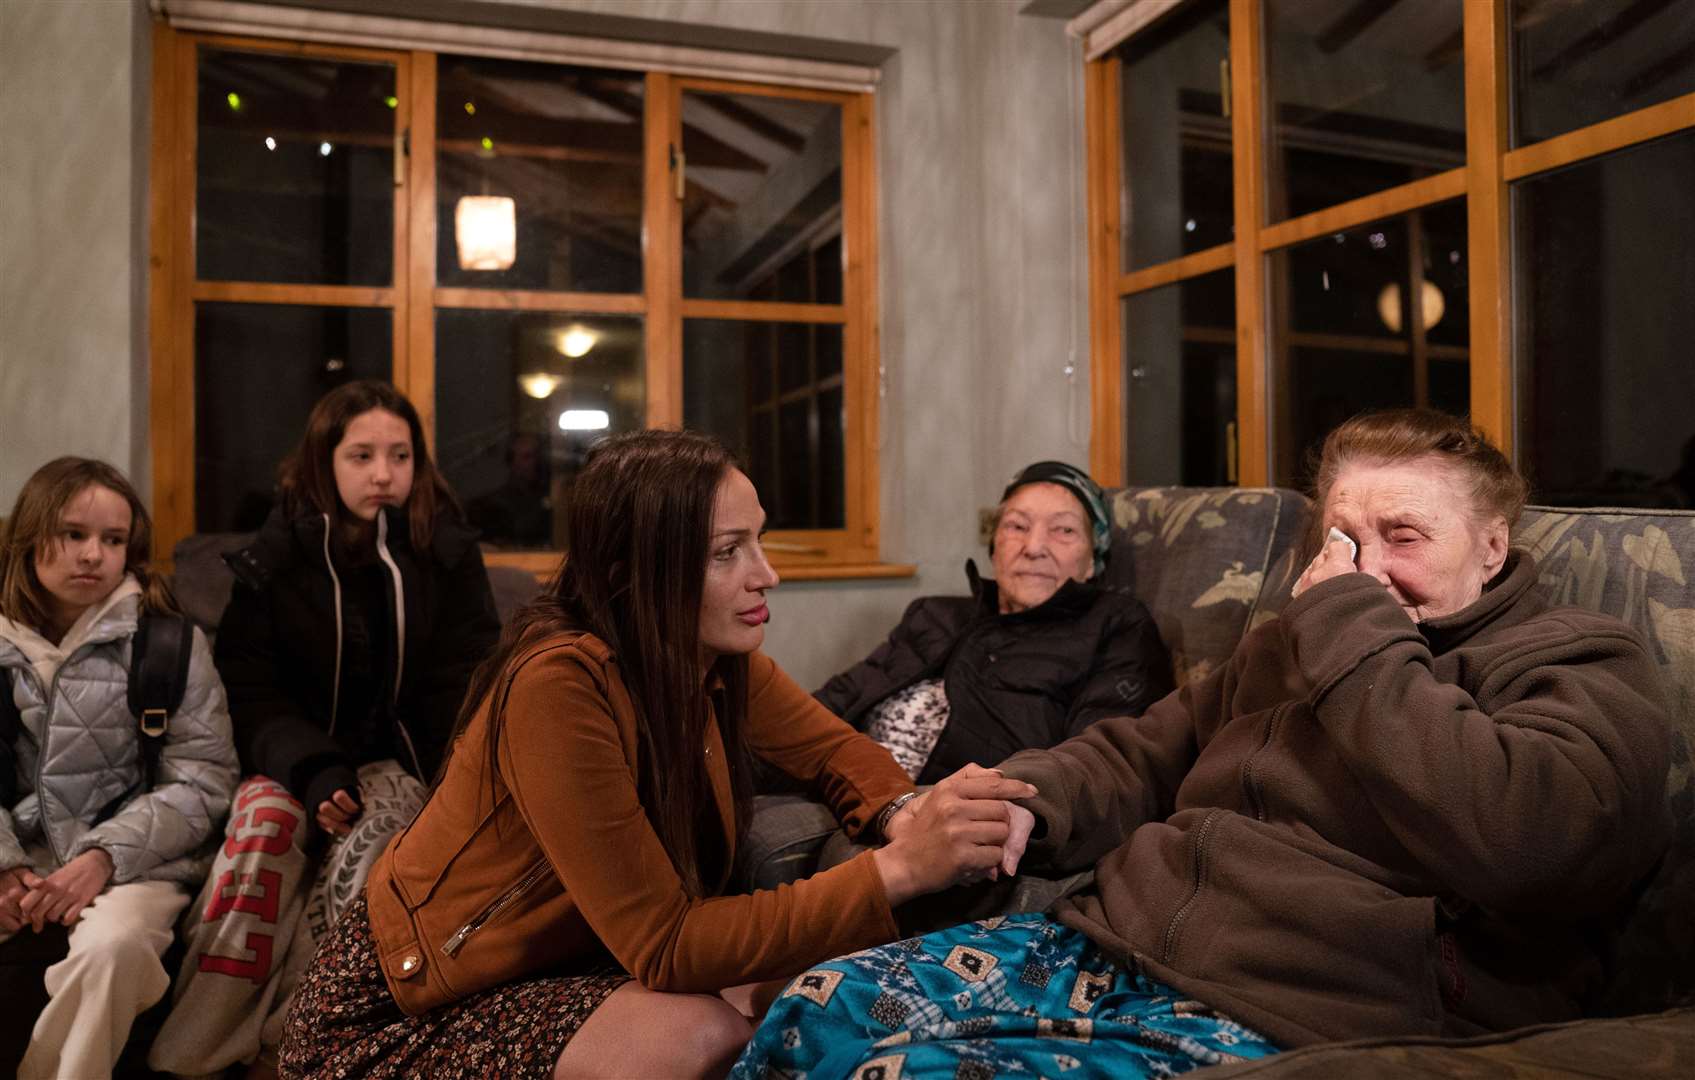 Ludmila Starkova, 90, (right) who fled Kharkiv in Ukraine, is comforted by Rend Platings, who connected the family with a businessman offering use of his house. (Joe Giddens/ PA)